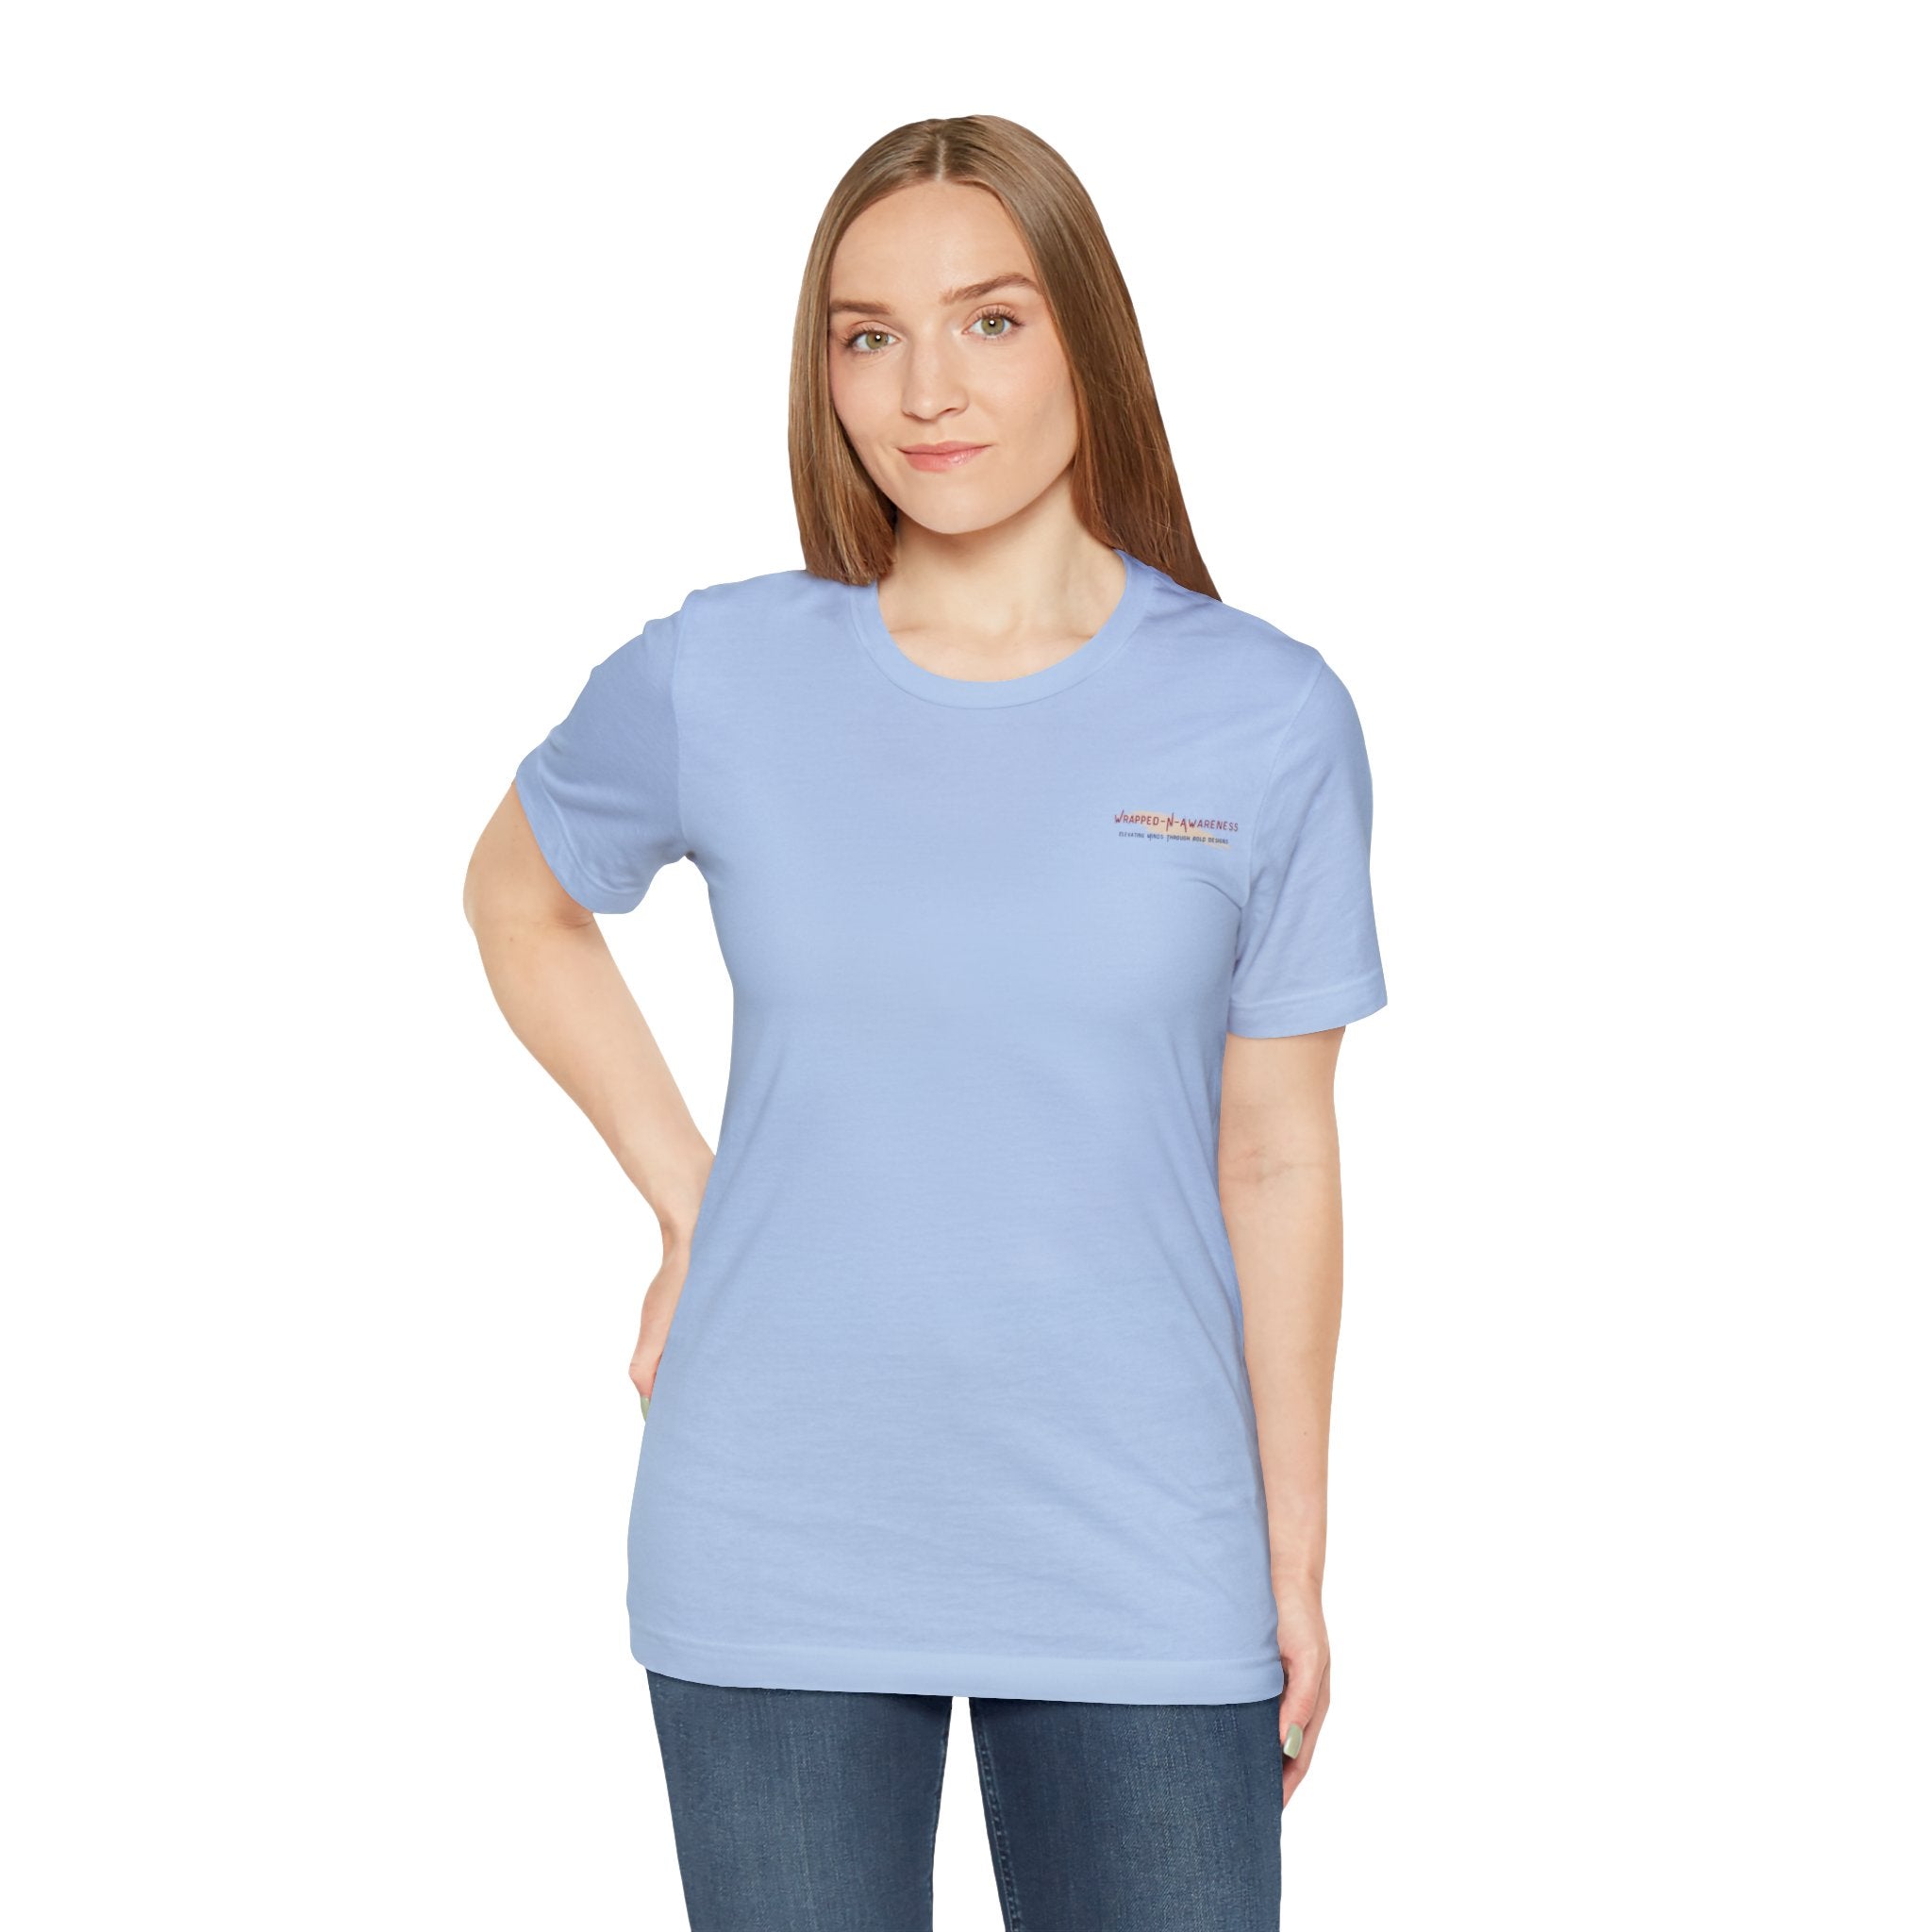 Release Your Mind Jersey Tee - Bella+Canvas 3001 Baby Blue Airlume Cotton Bella+Canvas 3001 Crew Neckline Jersey Short Sleeve Lightweight Fabric Mental Health Support Retail Fit Tear-away Label Tee Unisex Tee T-Shirt 2665564825699380320_2048 Printify